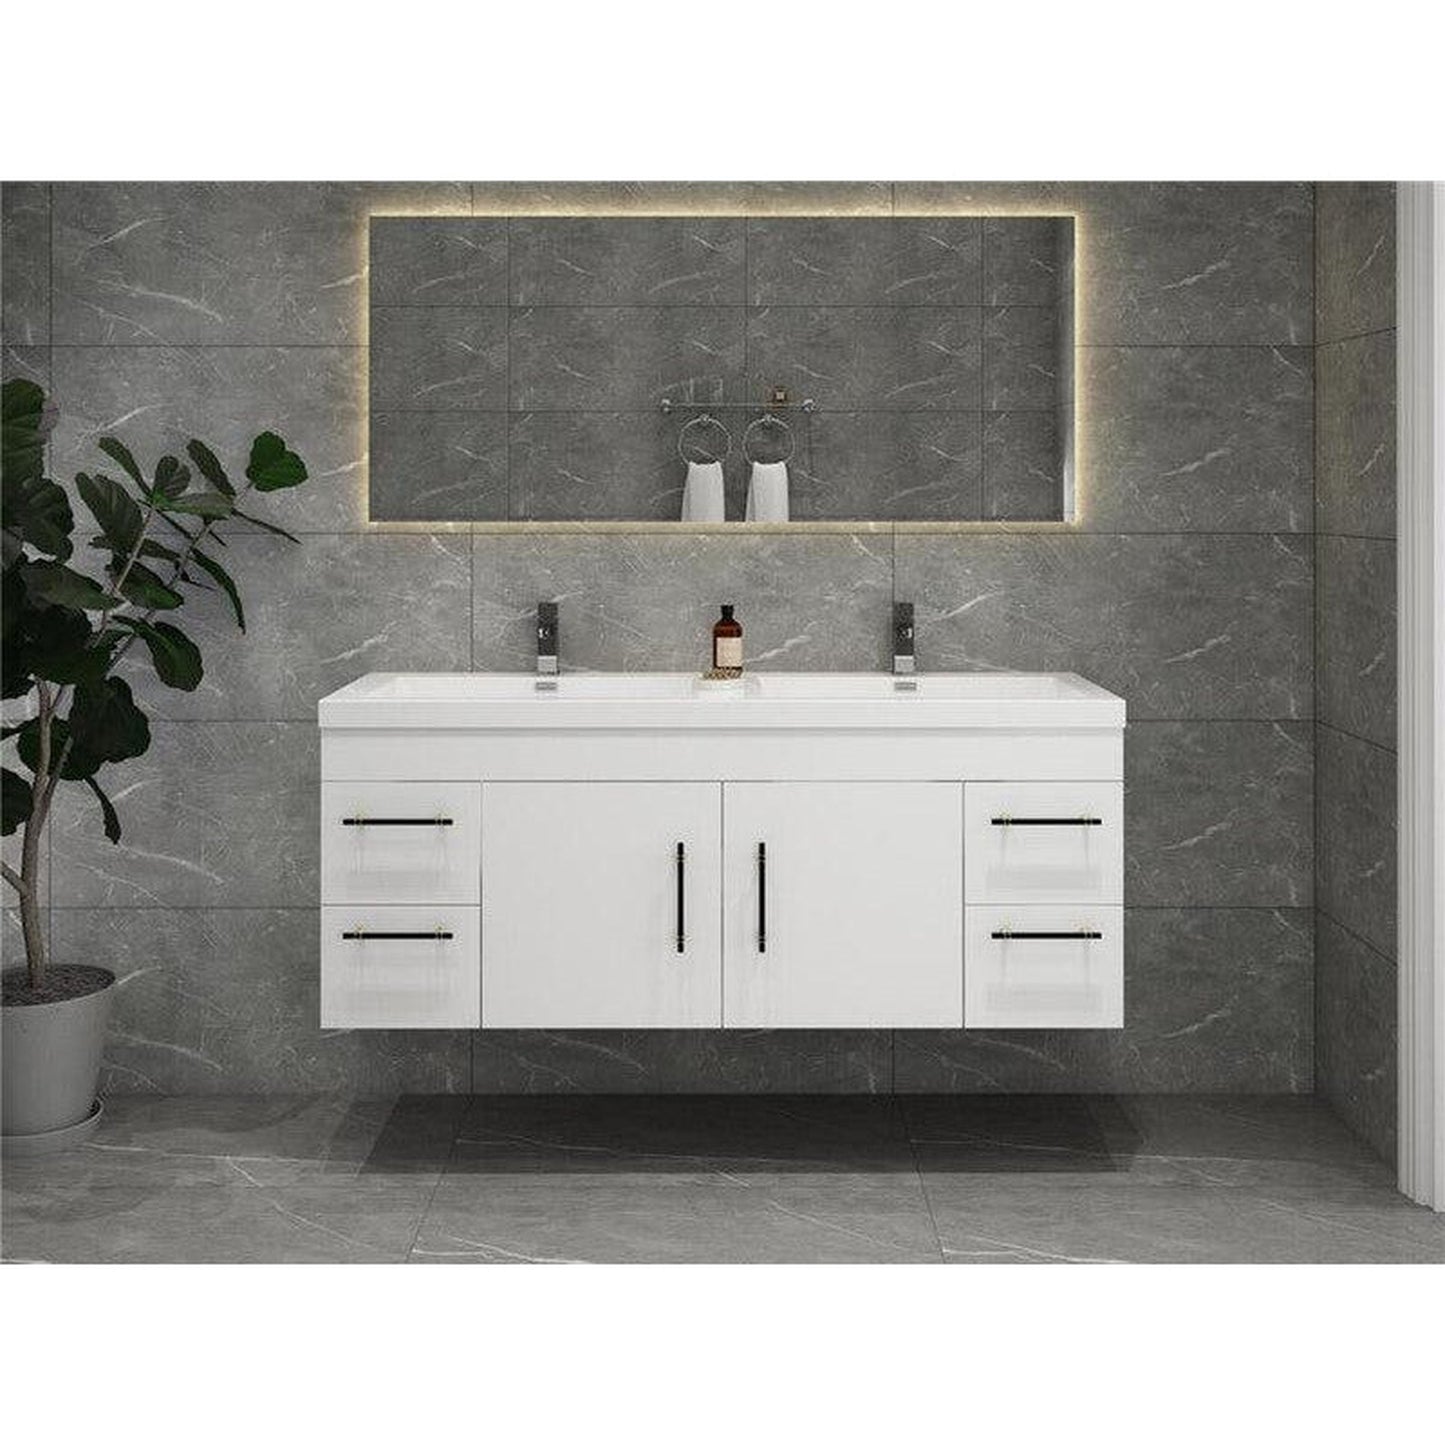 Moreno Bath ELSA 60" High Gloss White Wall-Mounted Vanity With Double Reinforced White Acrylic Sinks